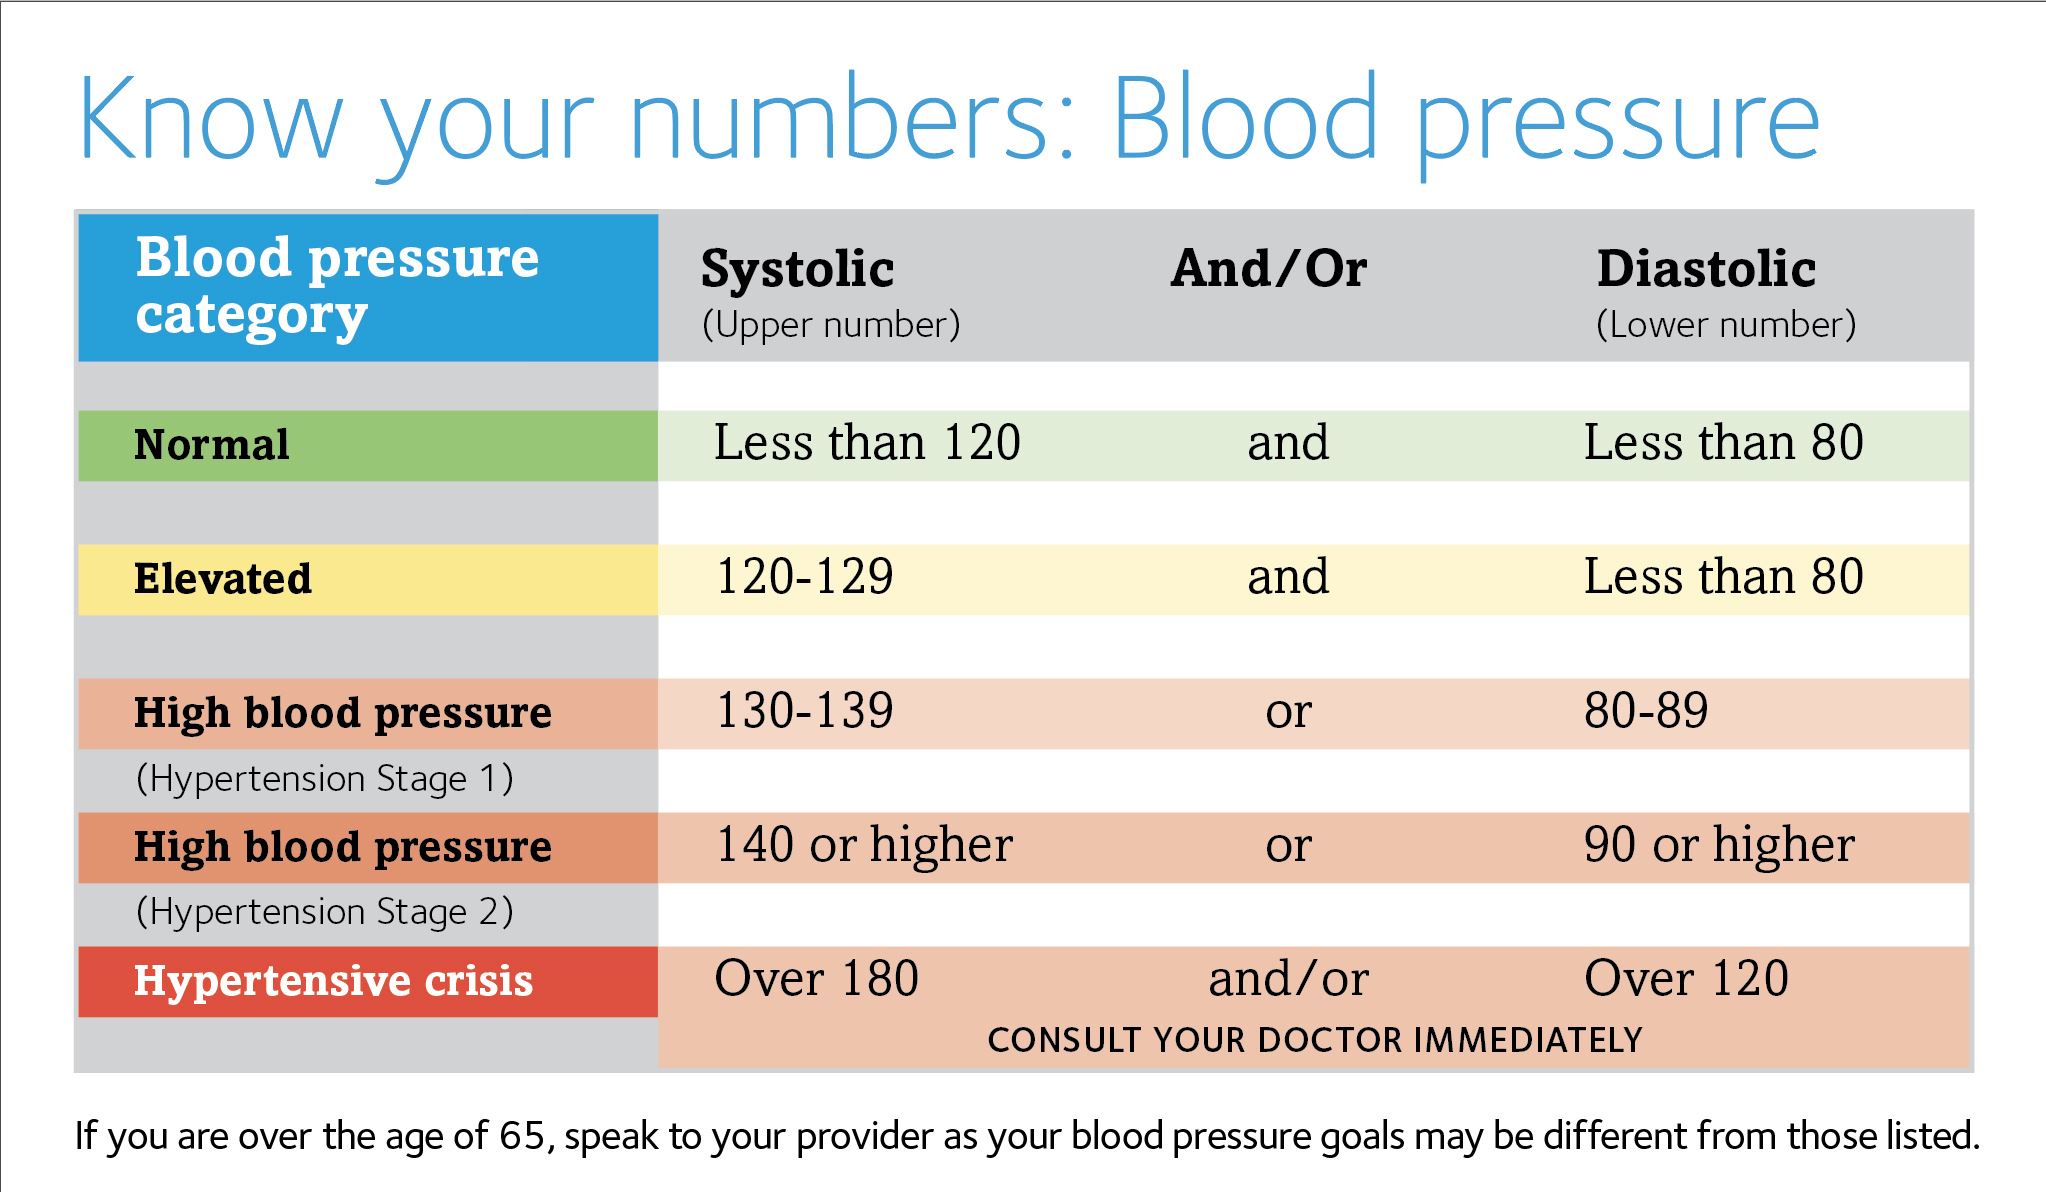 Know your numbers: Blood pressure guidelines